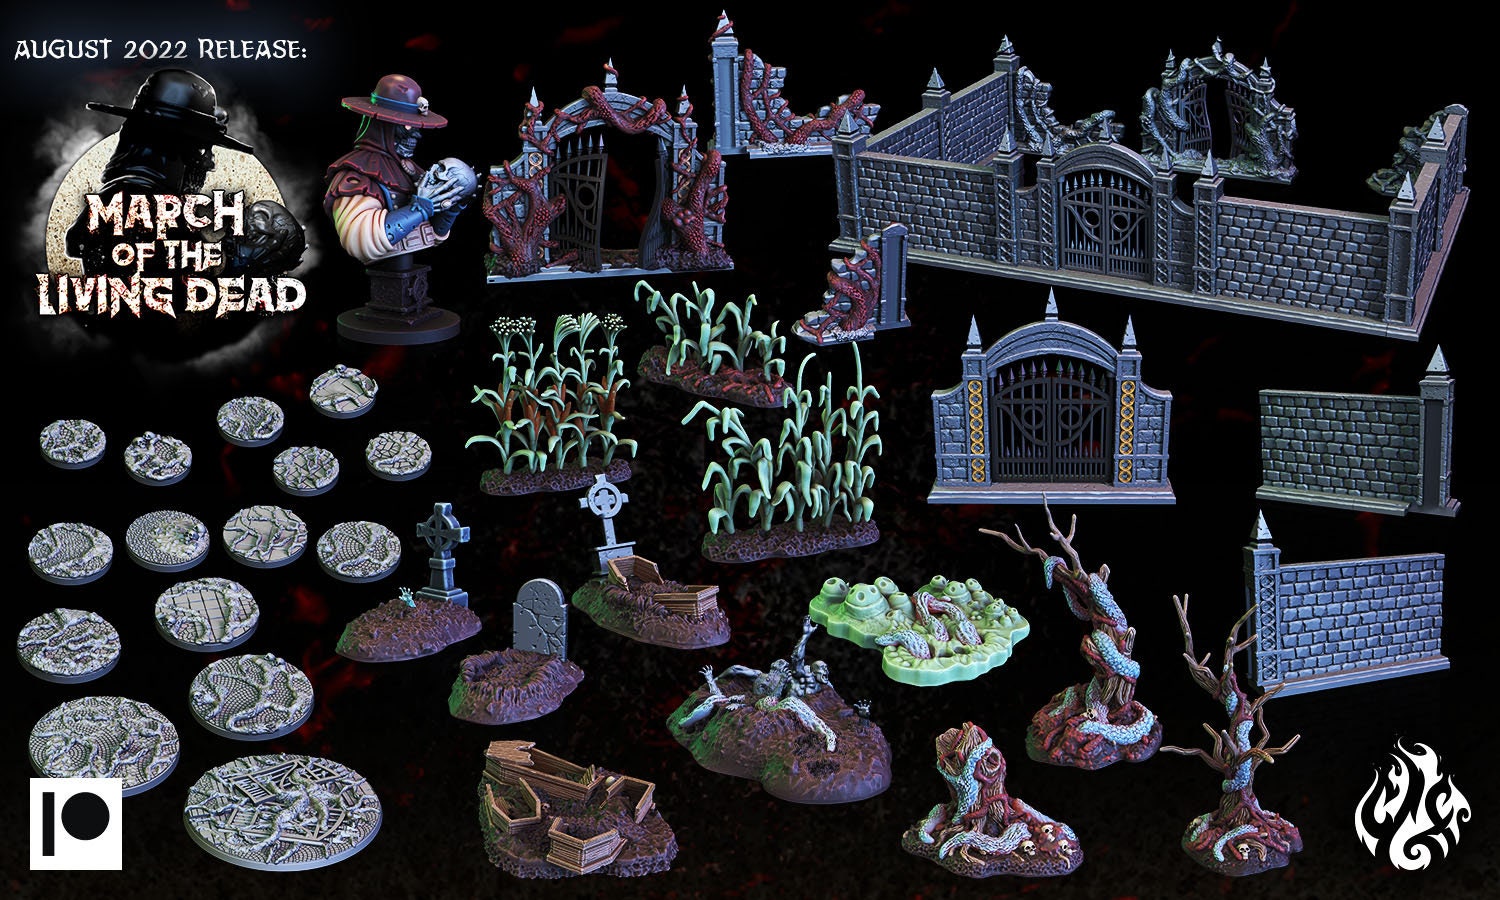 Zombie Warrior - Crippled God Foundry - March of the Living Dead 